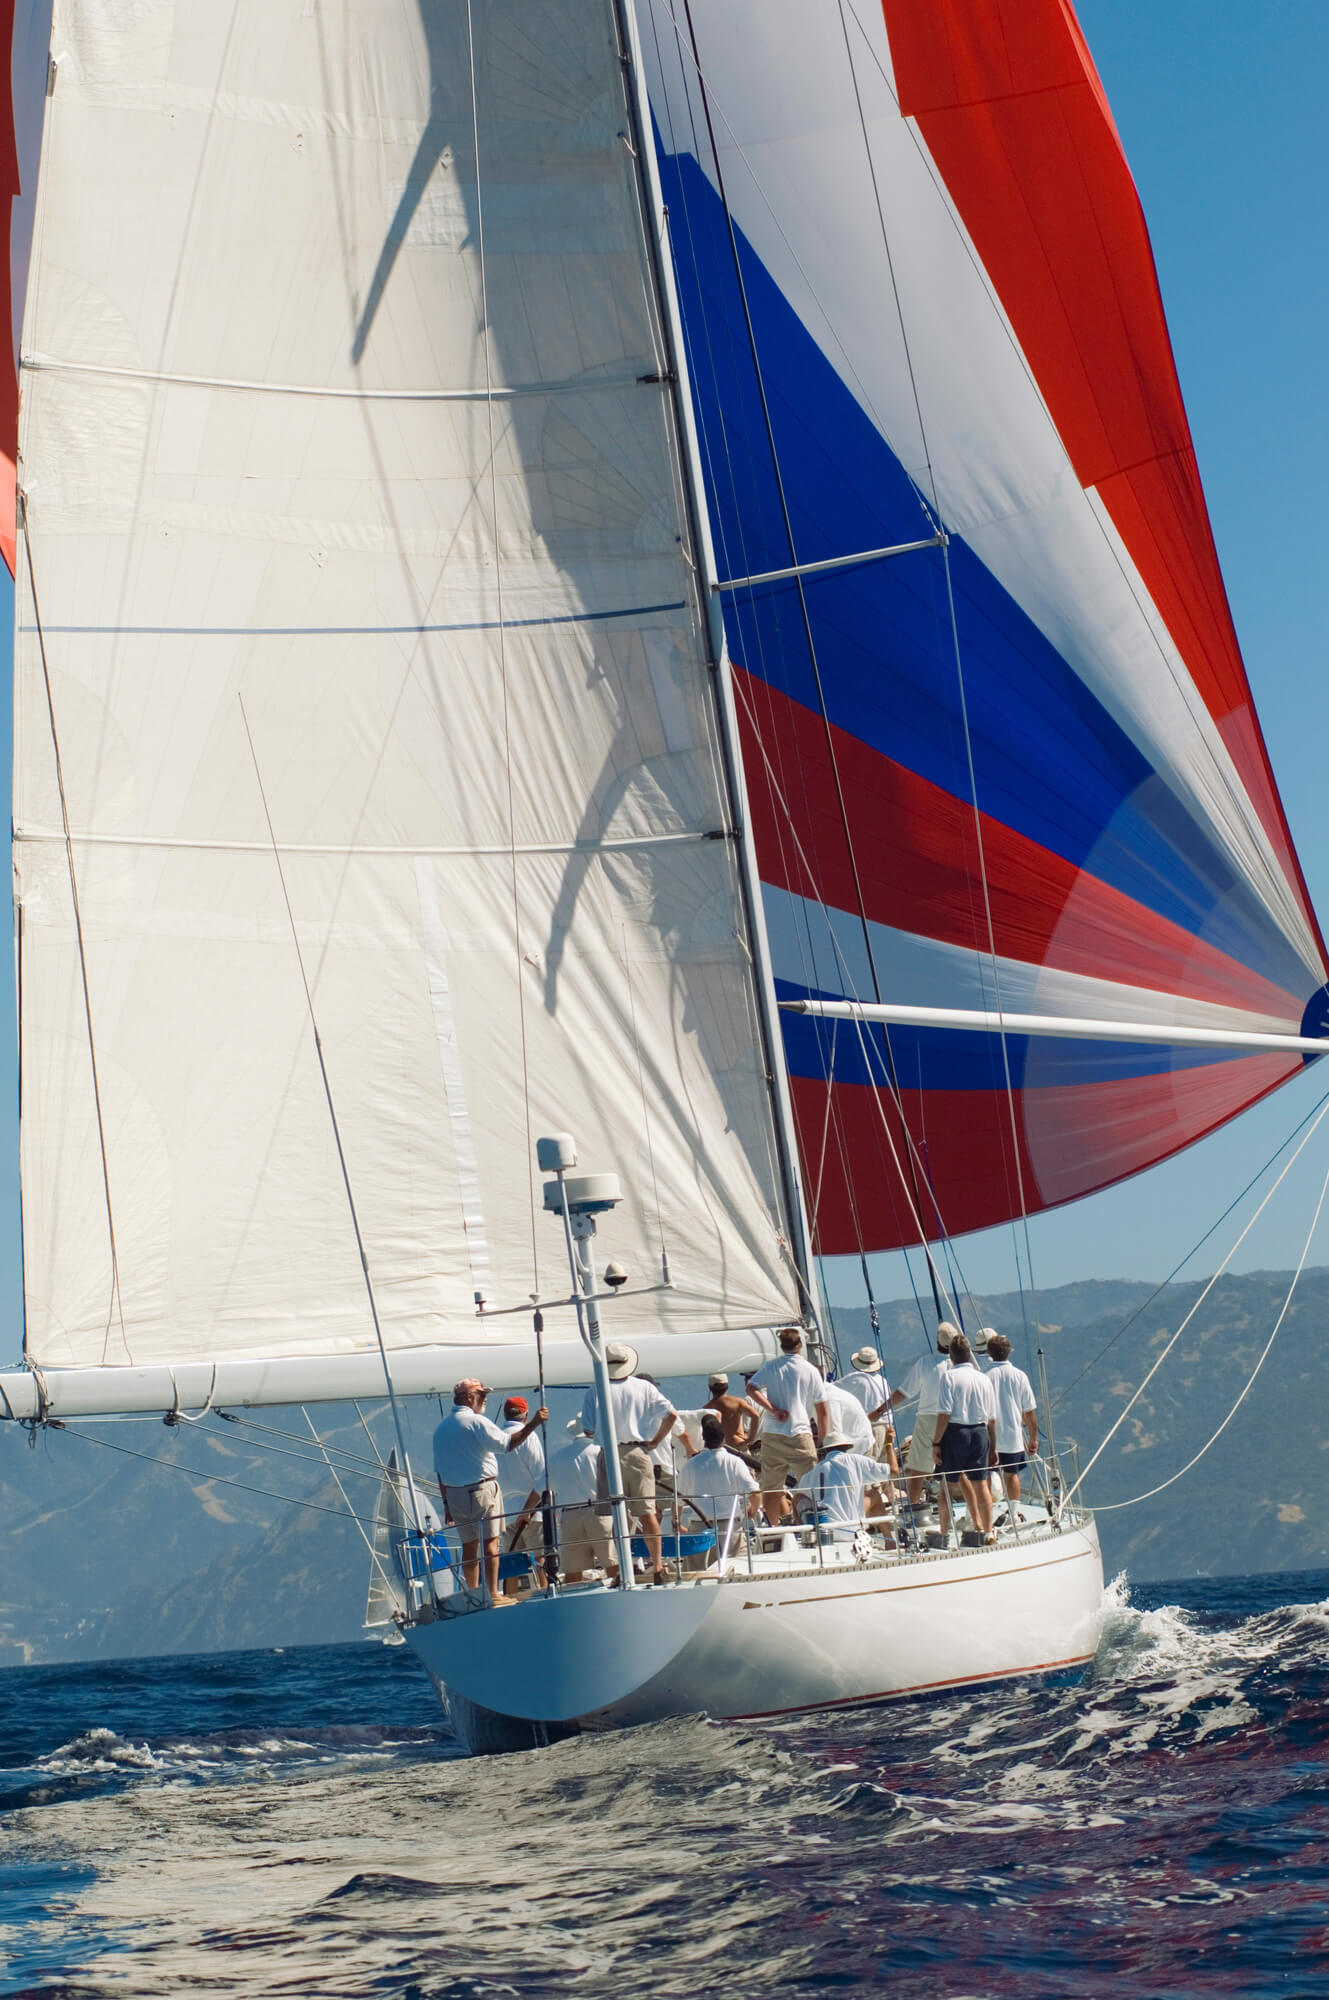 How To Rig, Set Up a Spinnaker: Full Guide - Improve Sailing